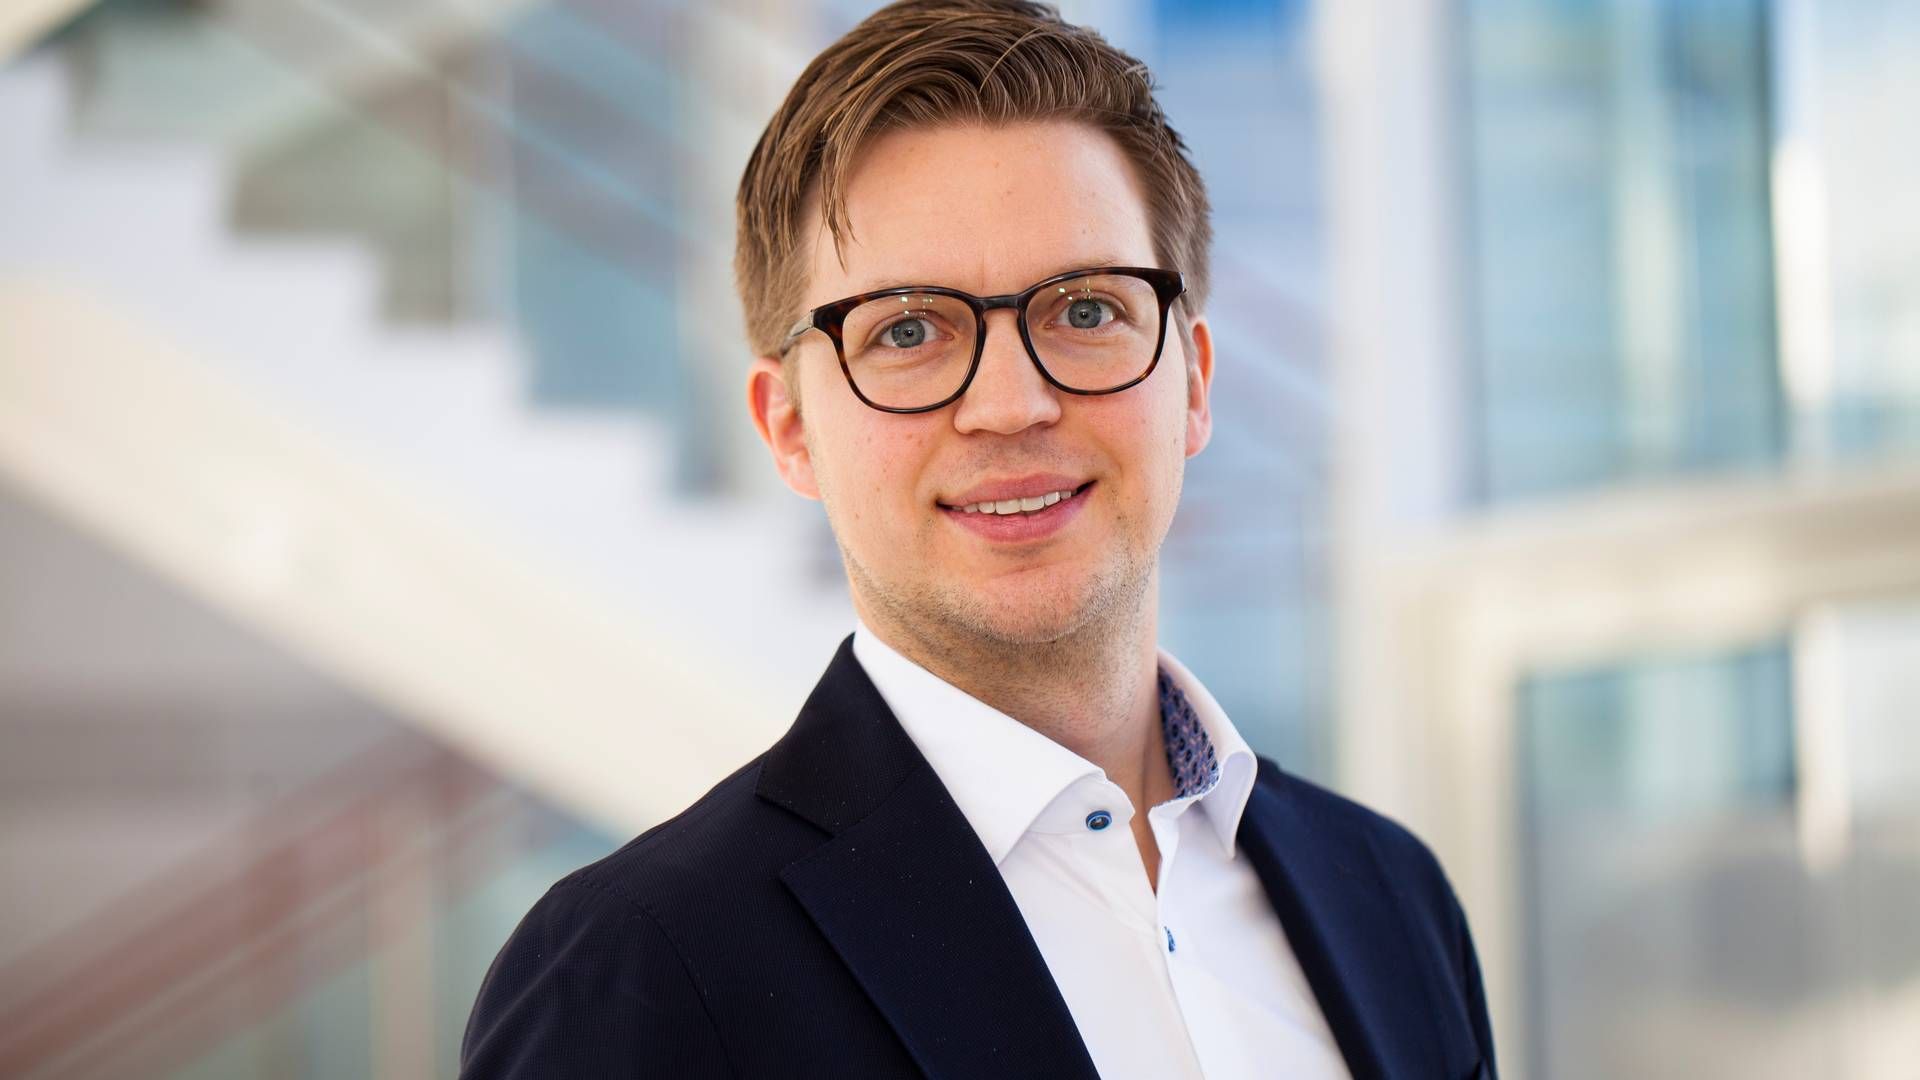 "Projects that further reduce societies’ dependence on fossil fuels are very important these days," says Kristofer Dreiman, Head of Responsible Investment at Länsförsäkringar Liv.